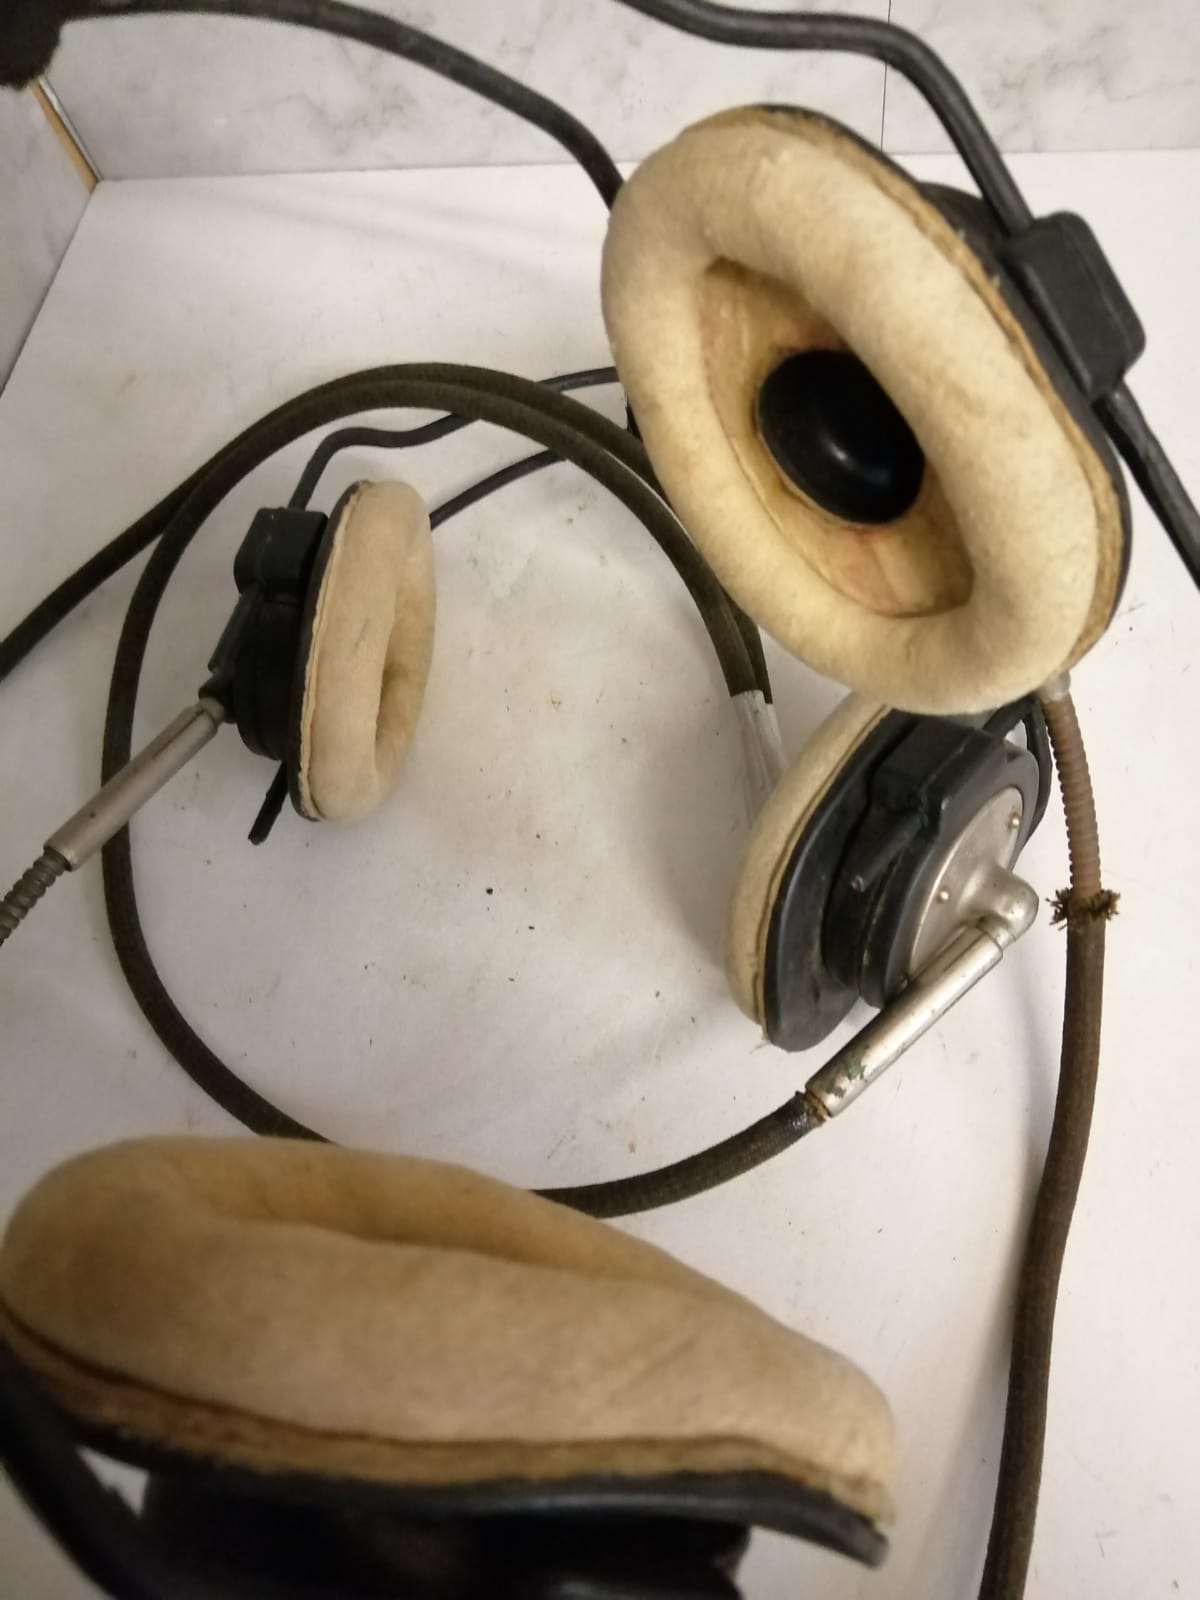 Pair of WW2 piped aircraft working headphones. Vintage